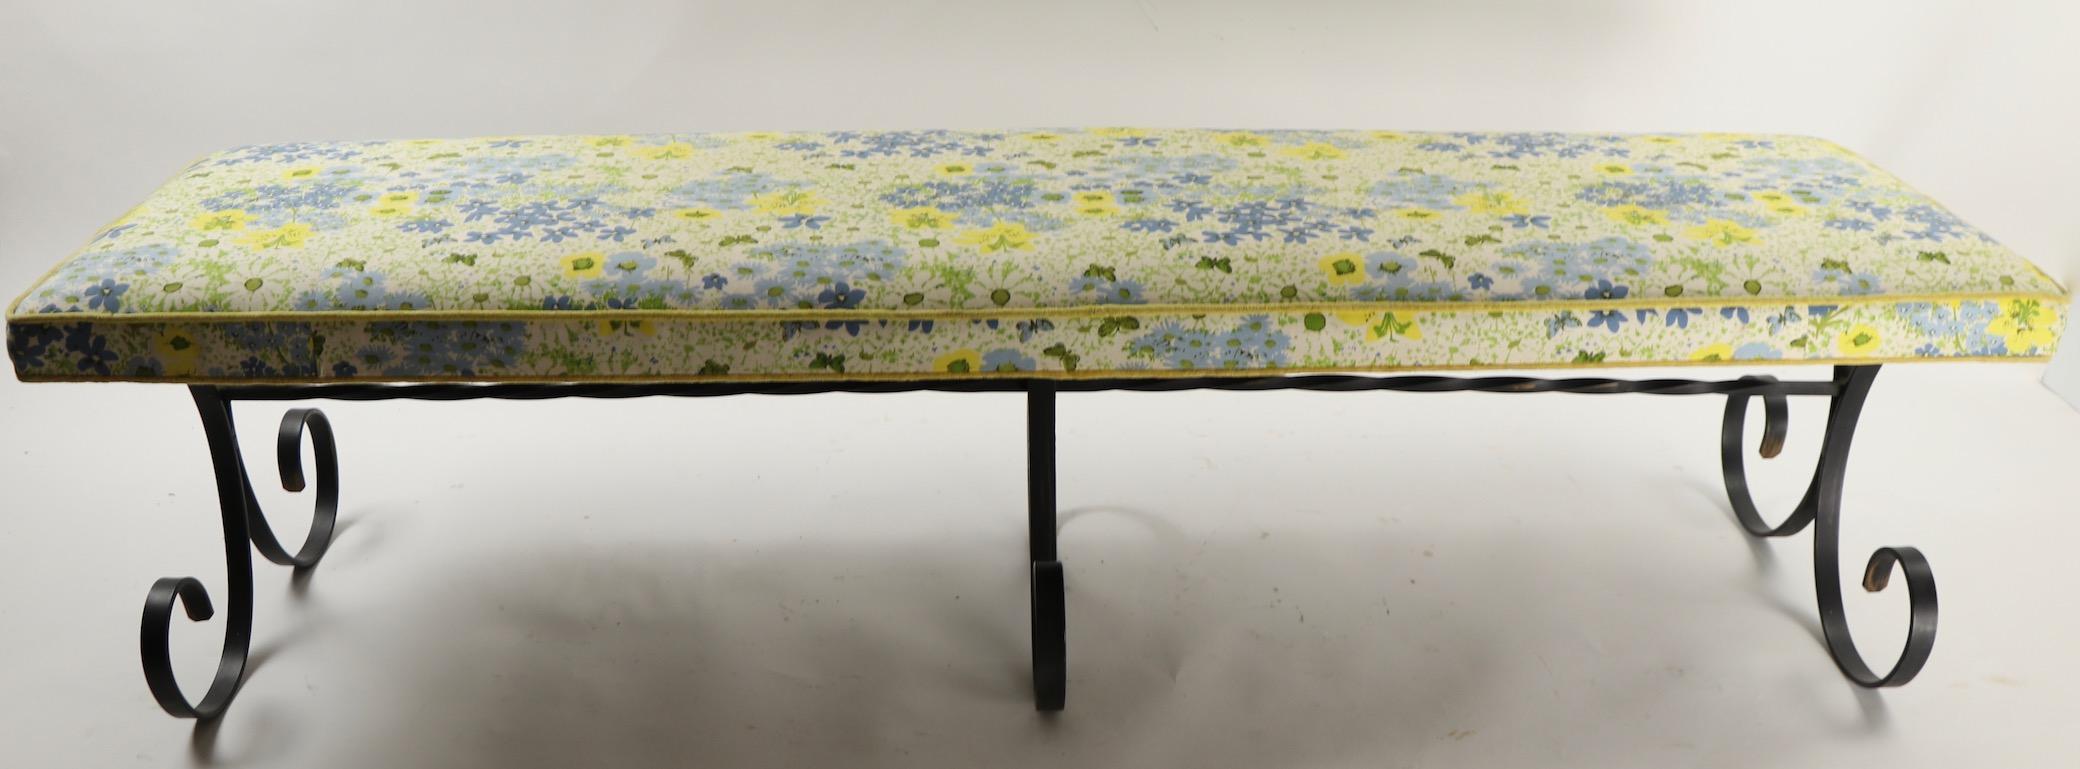 extra long upholstered bench